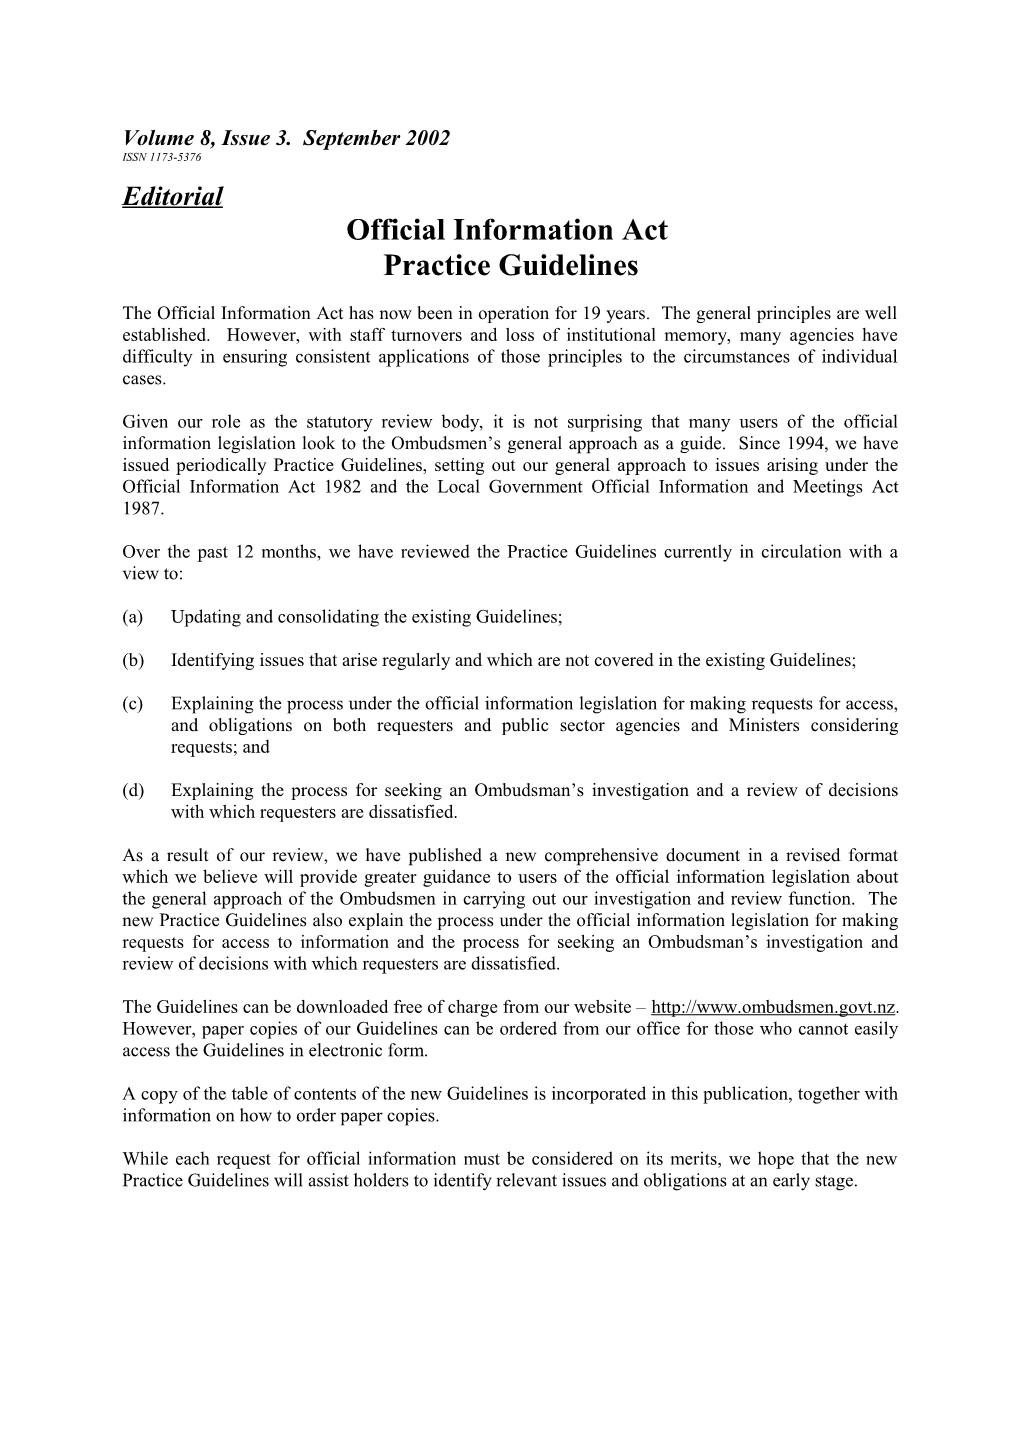 Official Information Act